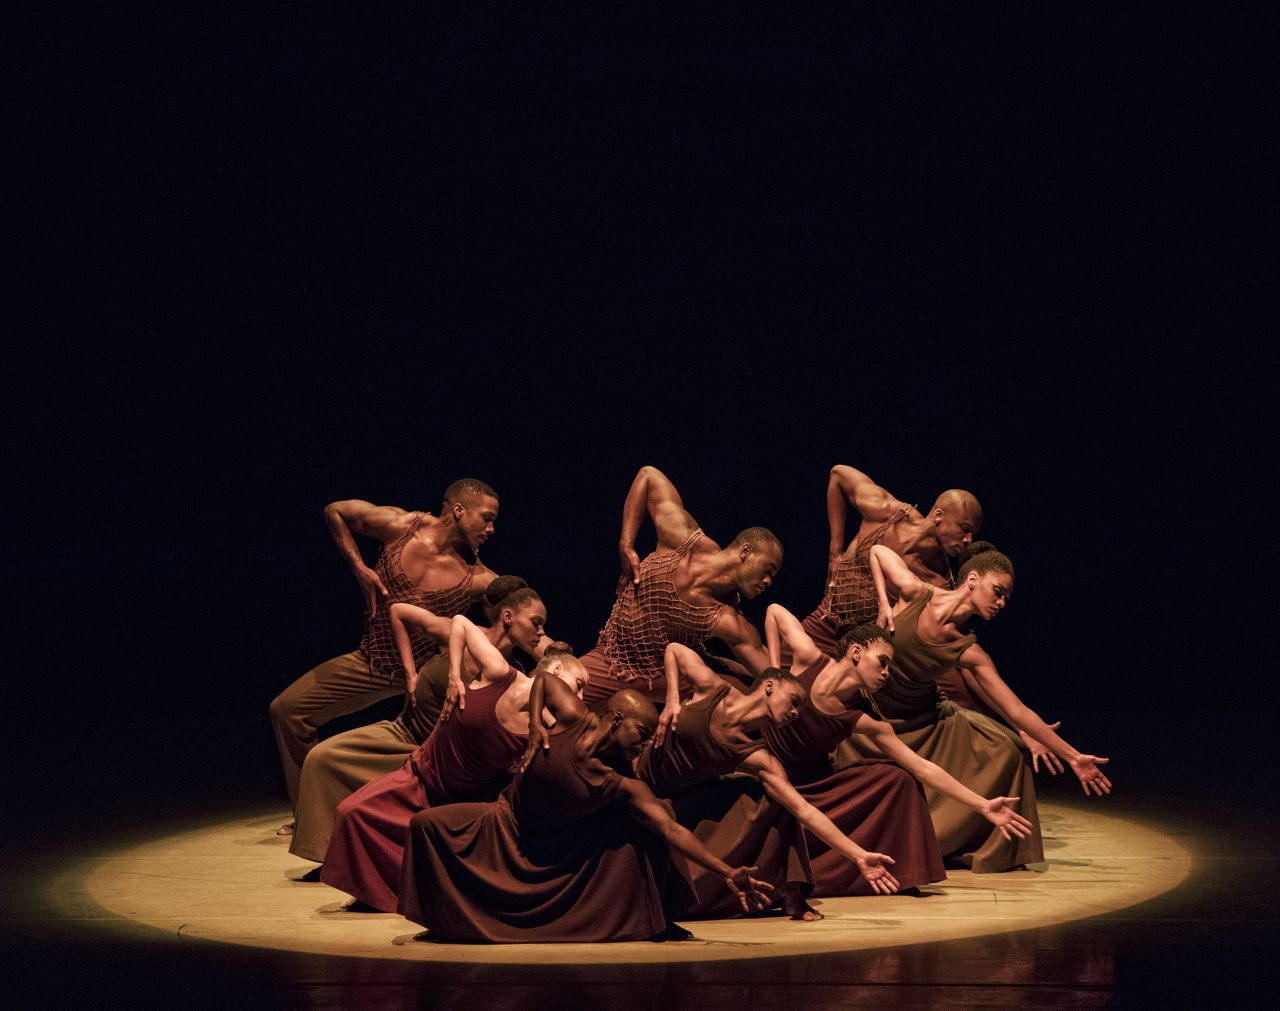 Alvin Ailey American Dance Theater performing Alvin Ailey's masterpiece 'Revelations' 